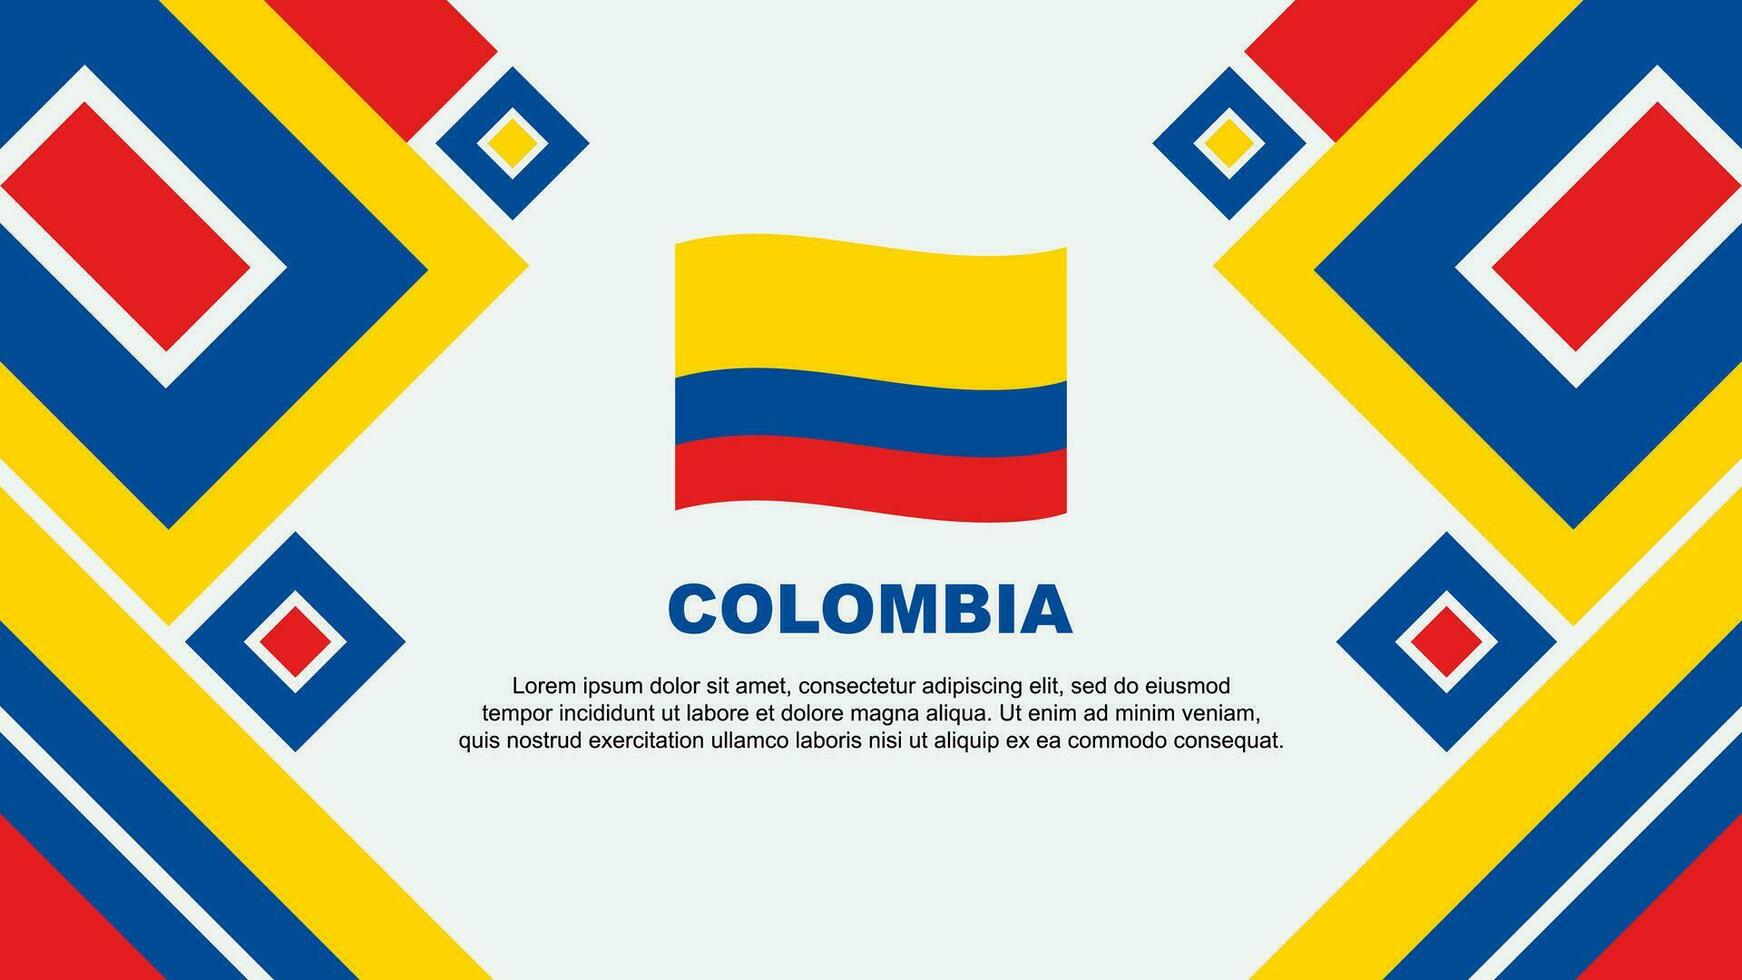 Colombia Flag Abstract Background Design Template. Colombia Independence Day Banner Wallpaper Vector Illustration. Colombia Cartoon